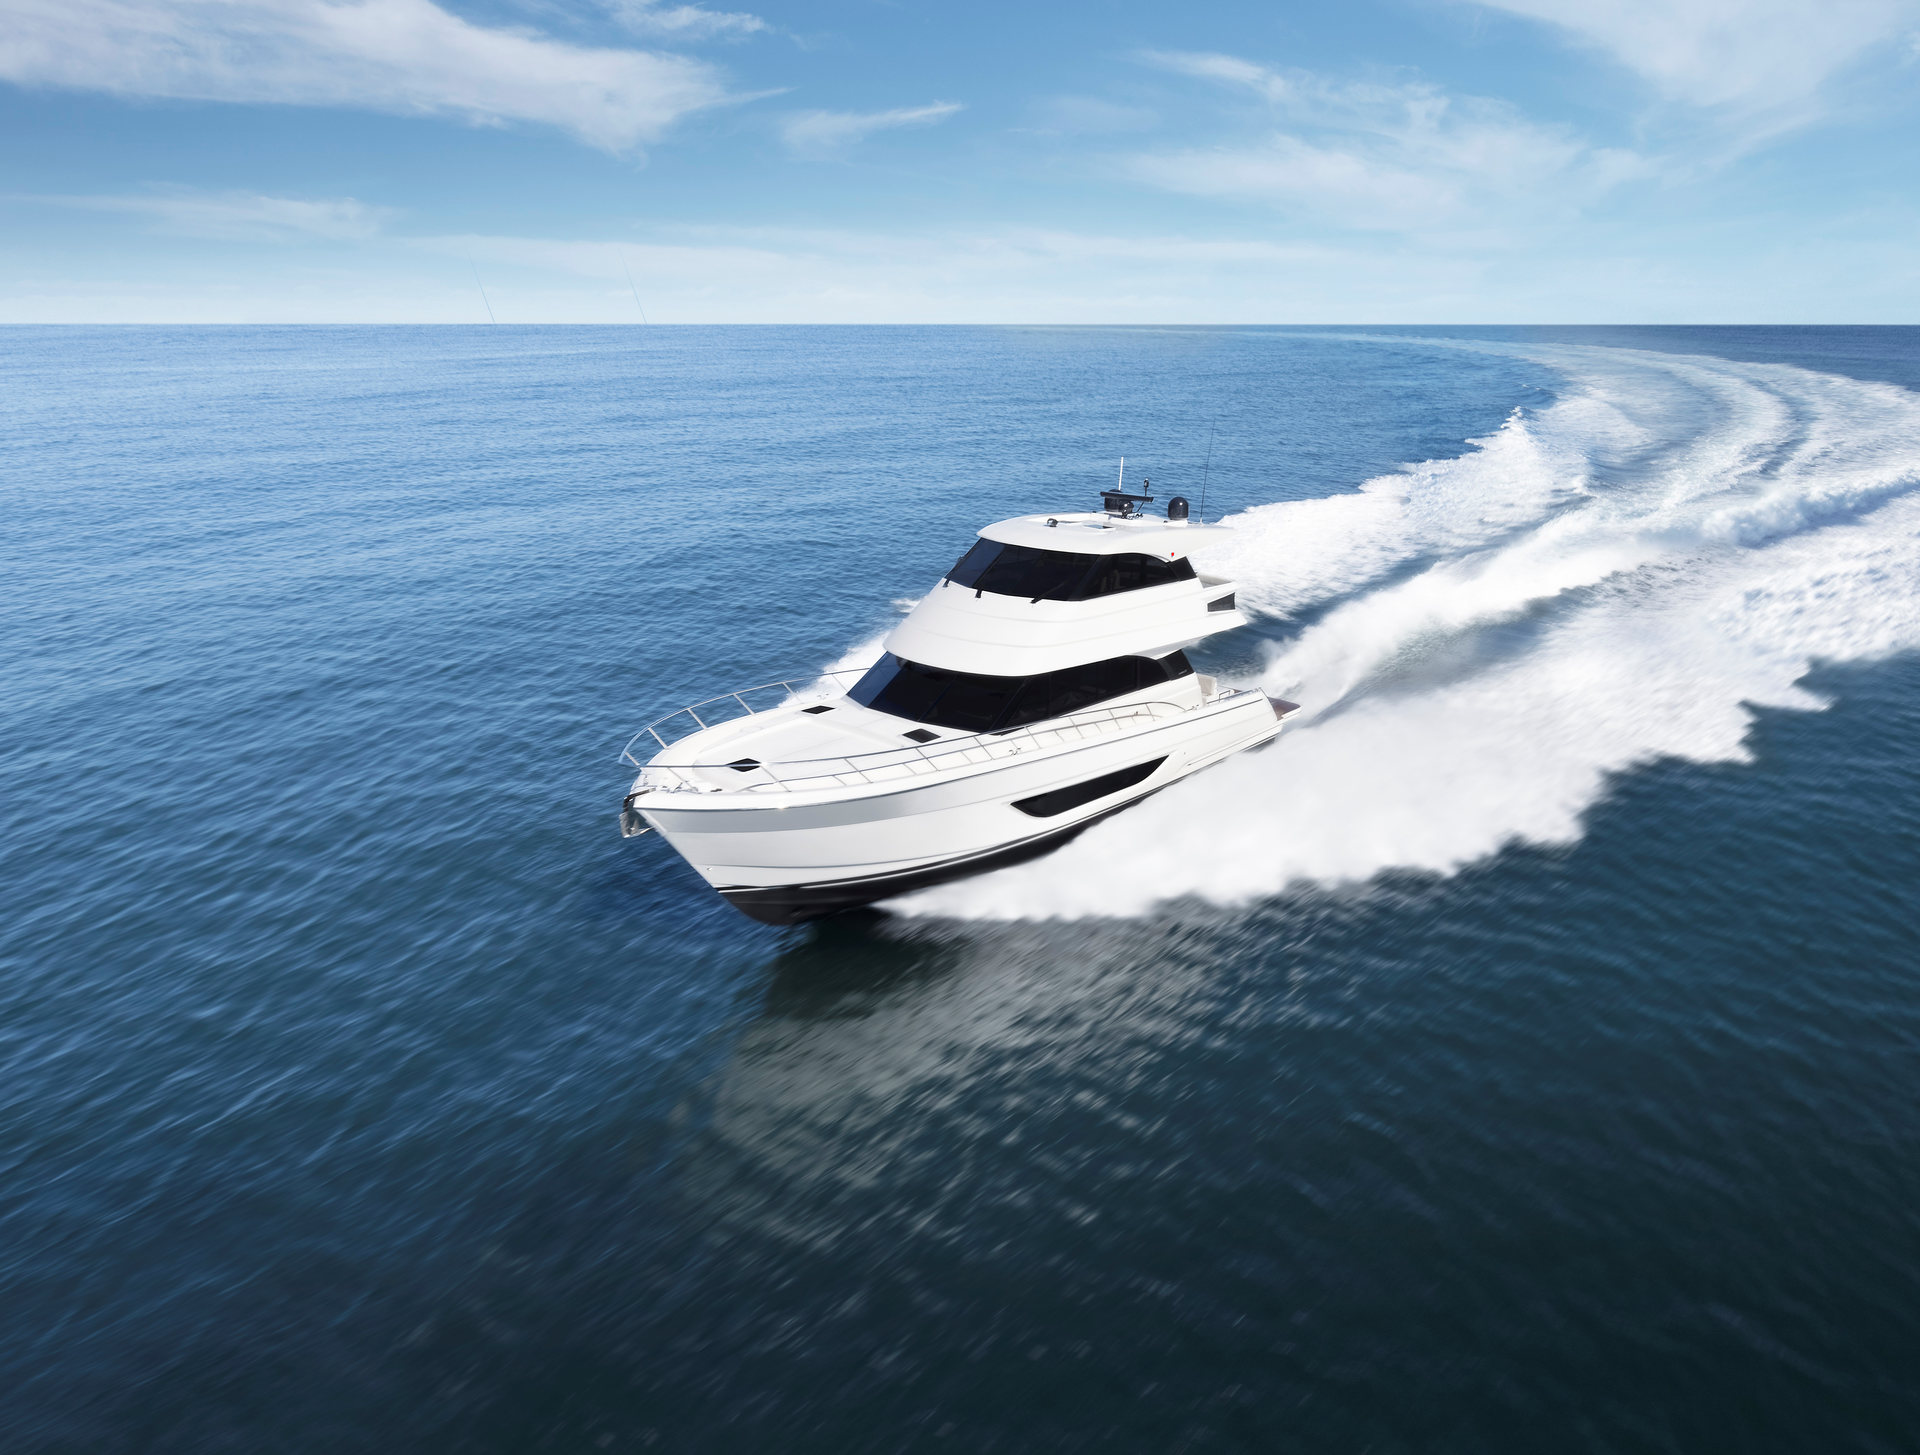 360 VR Virtual Tours of the Maritimo M55